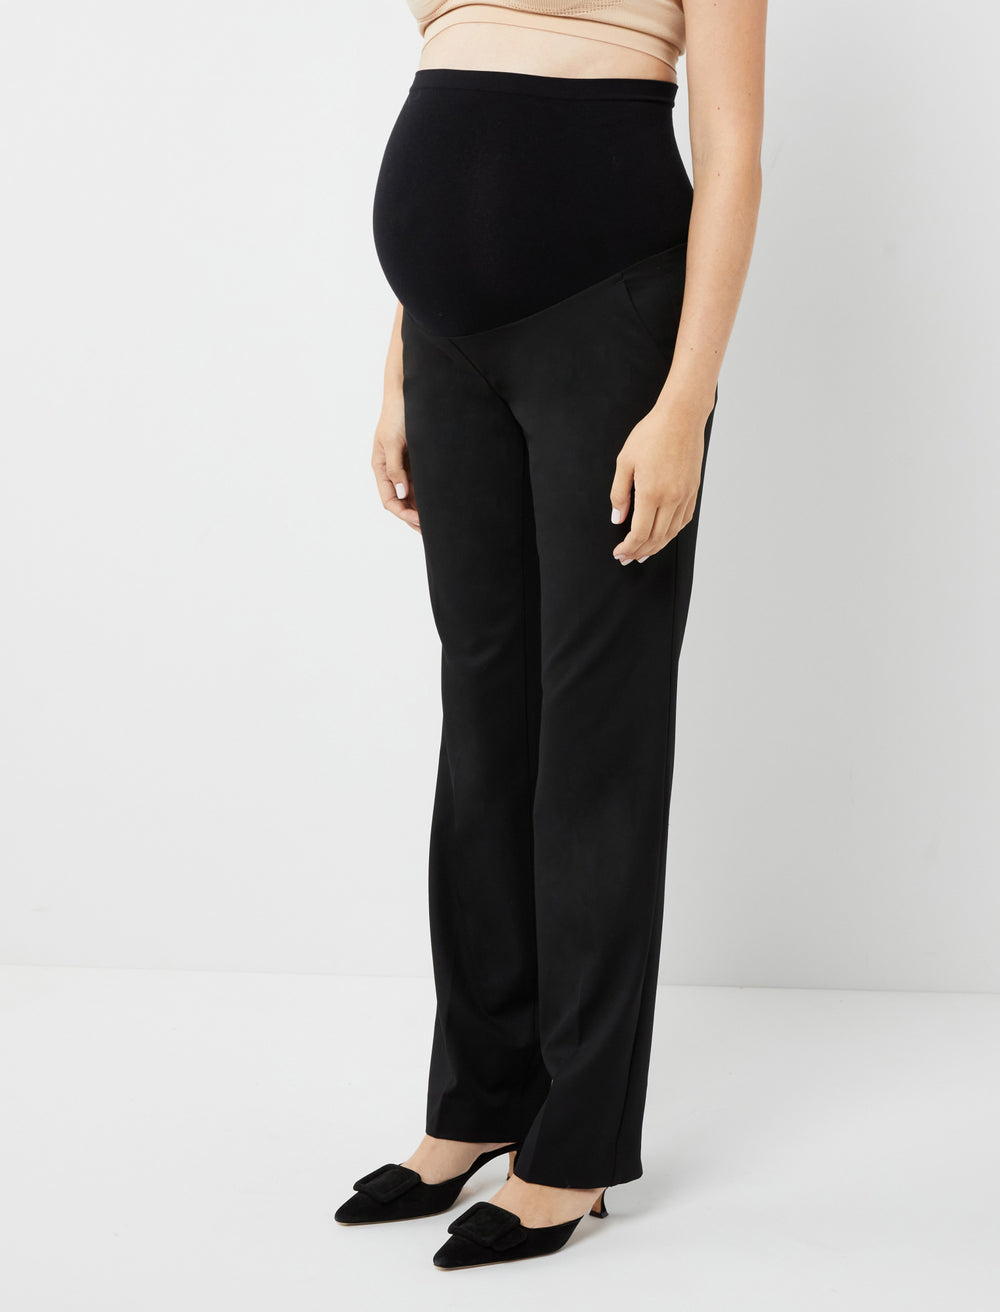 High Waist Knit Maternity Pants With Belt Comfortable Pregnancy Thick  Maternity Leggings 20220225 Q2 From Dp02, $12.02 | DHgate.Com